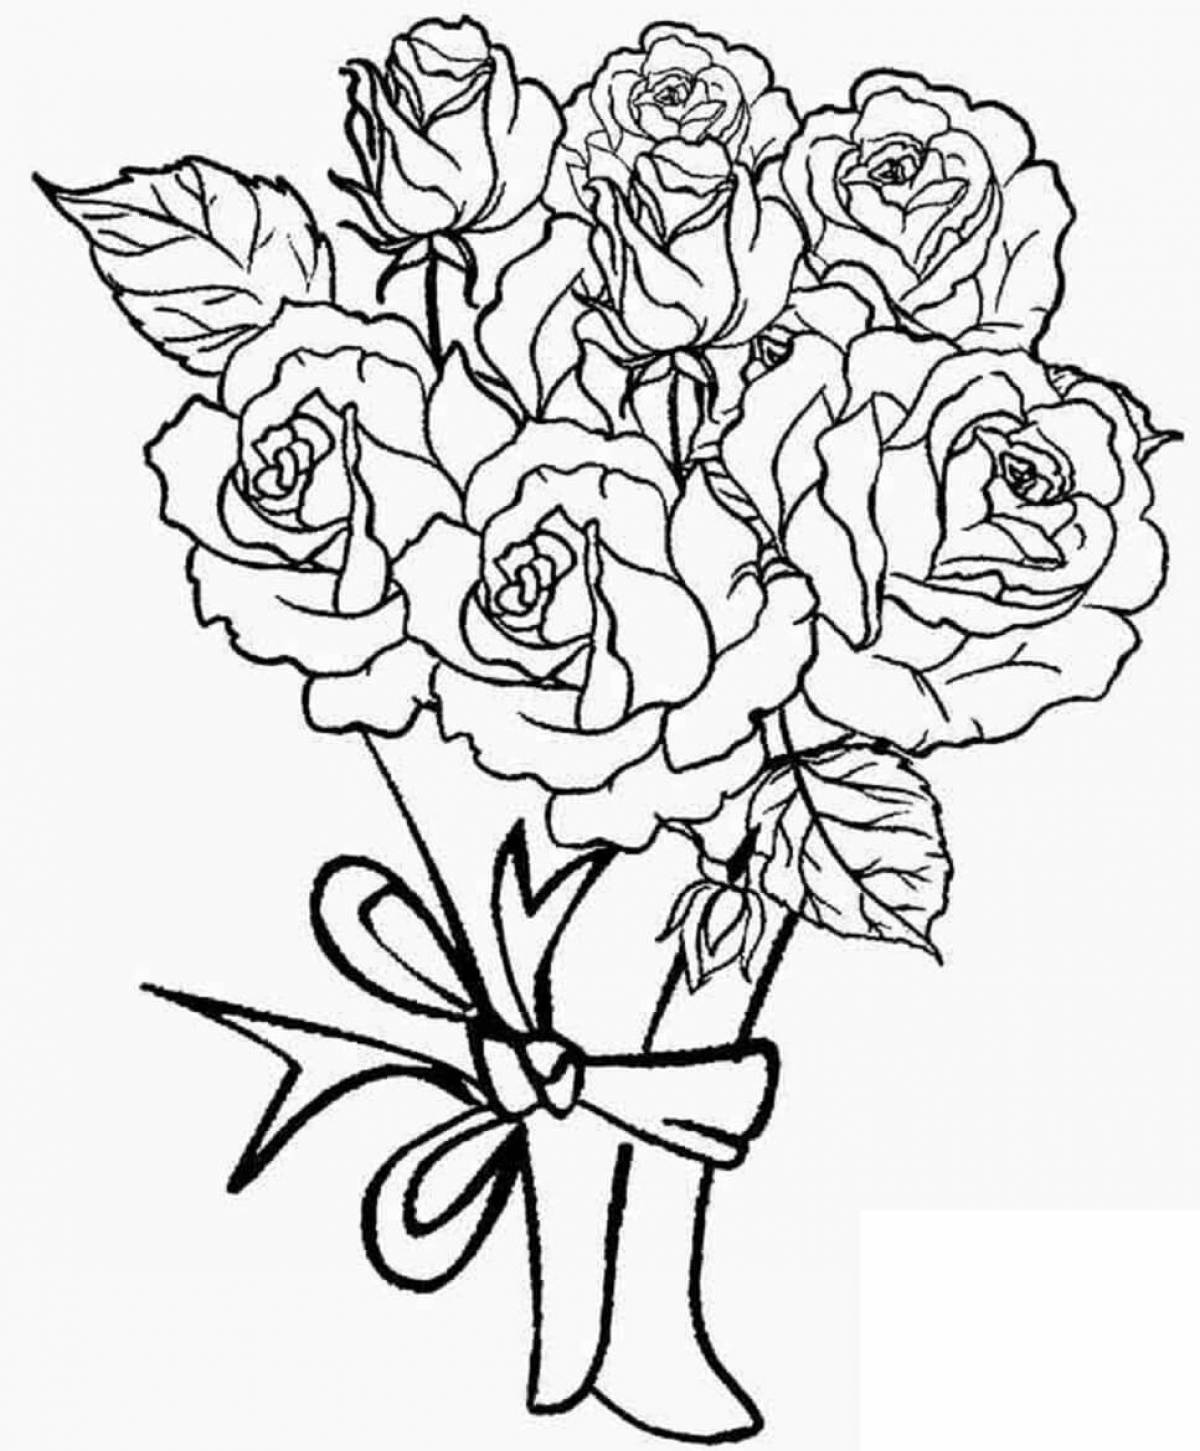 Bright bouquet coloring for mom